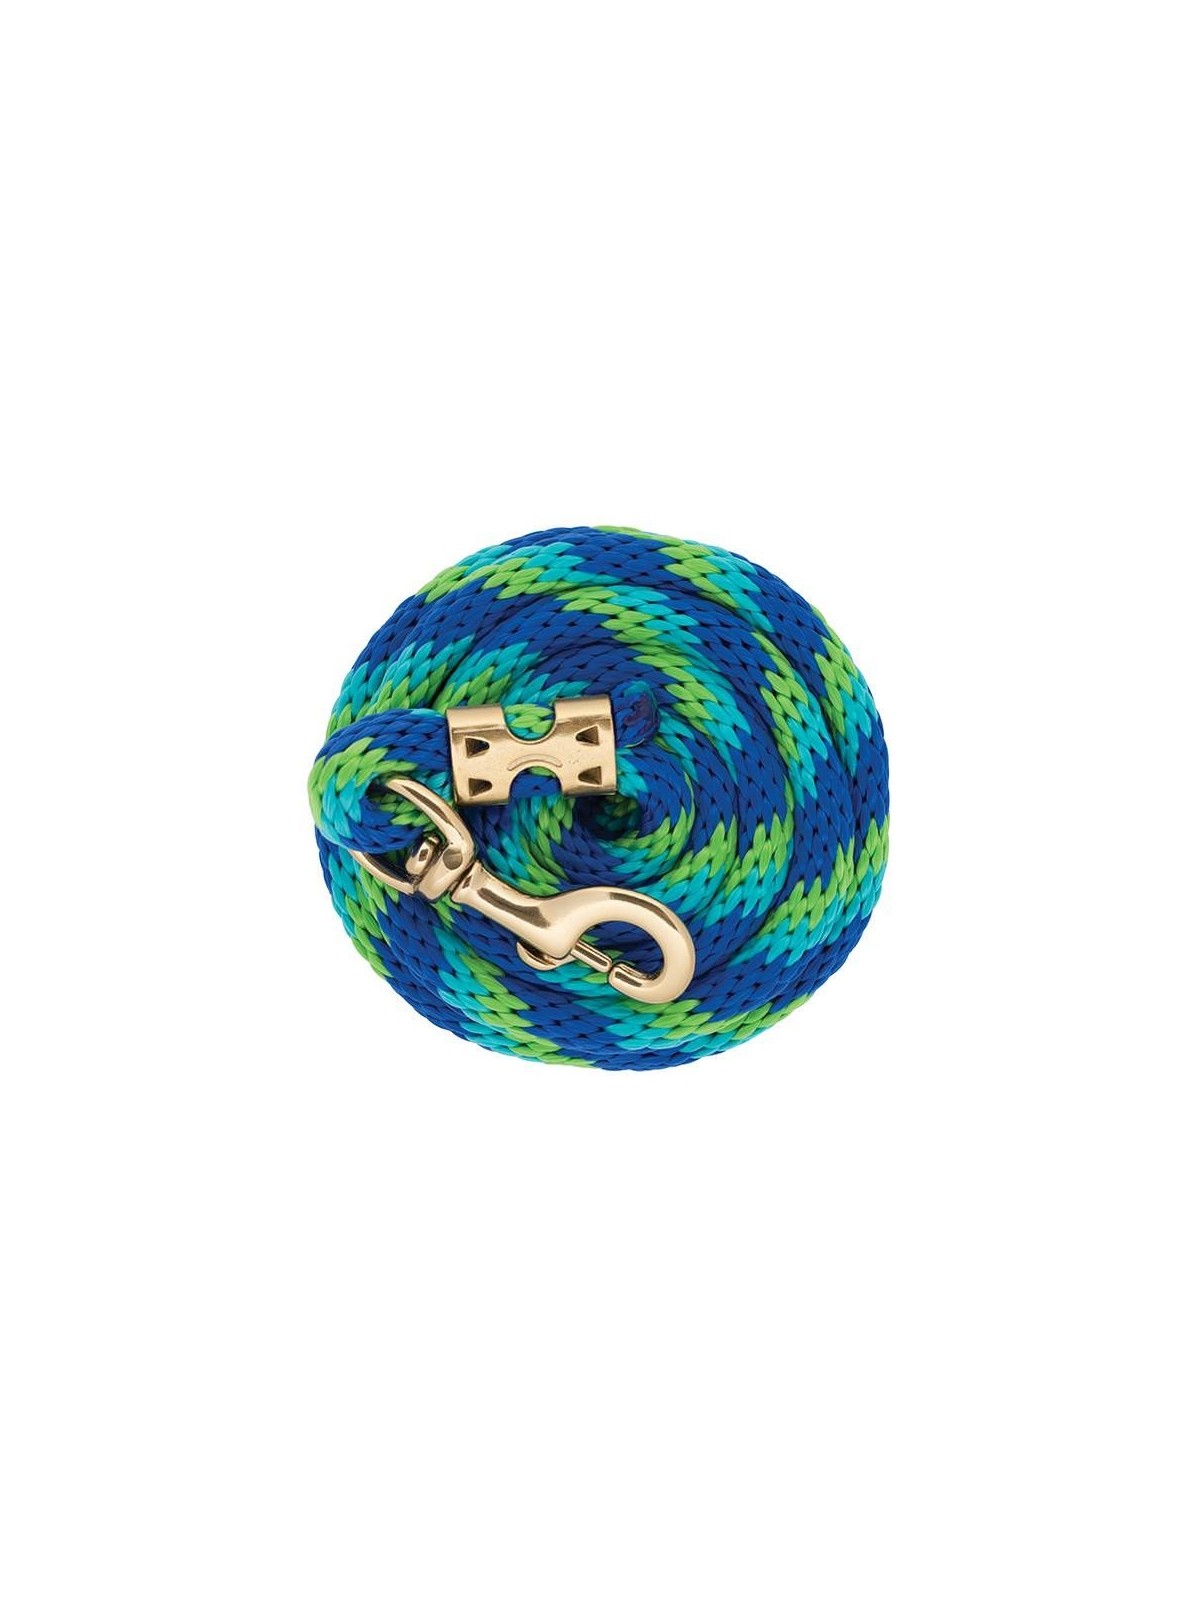 Value Lead Rope multi blue turquoise green B23